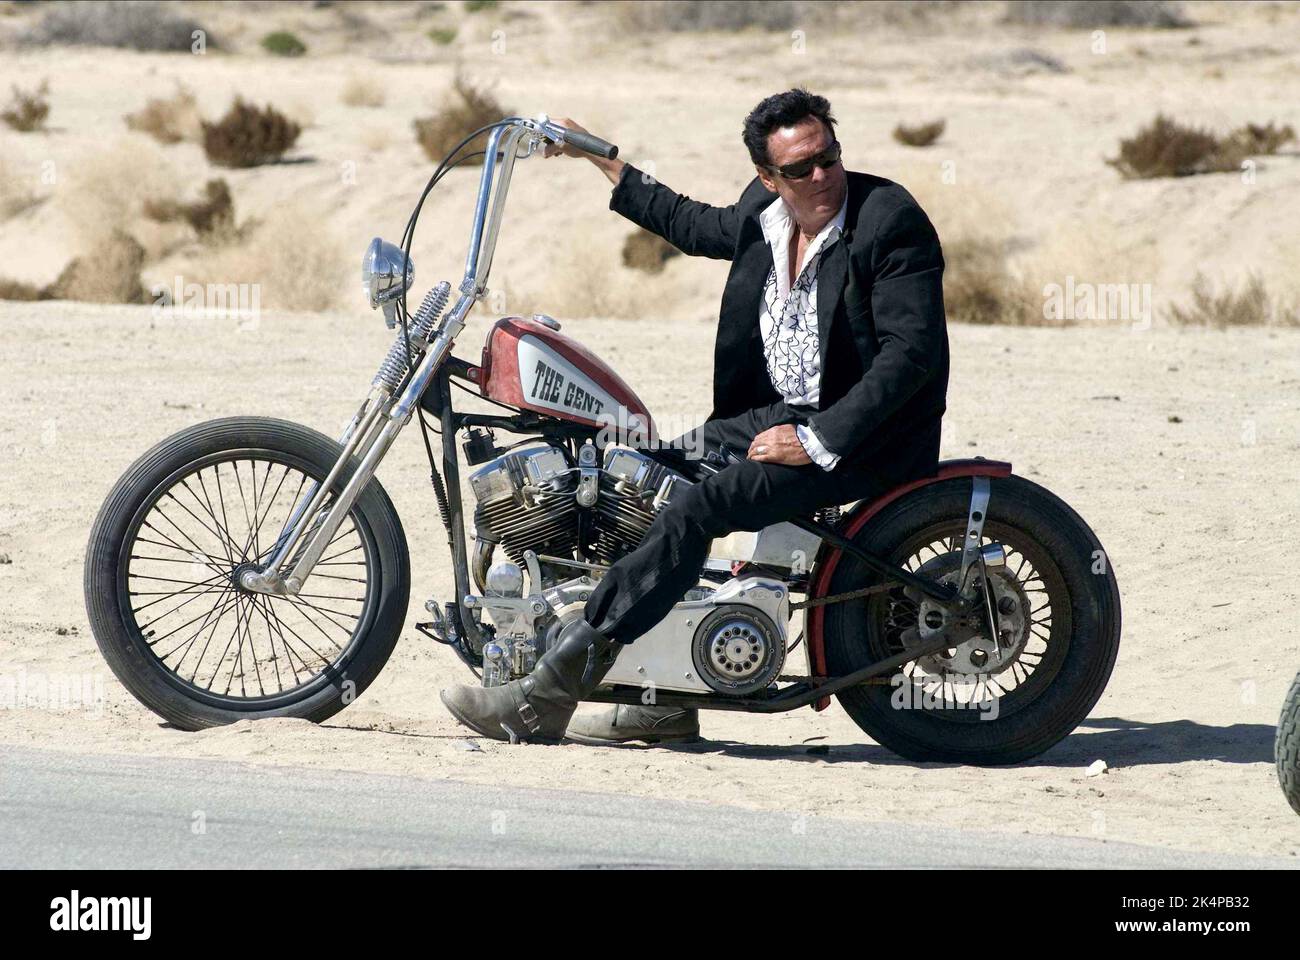 MICHAEL MADSEN, HELL RIDE, 2008 Banque D'Images